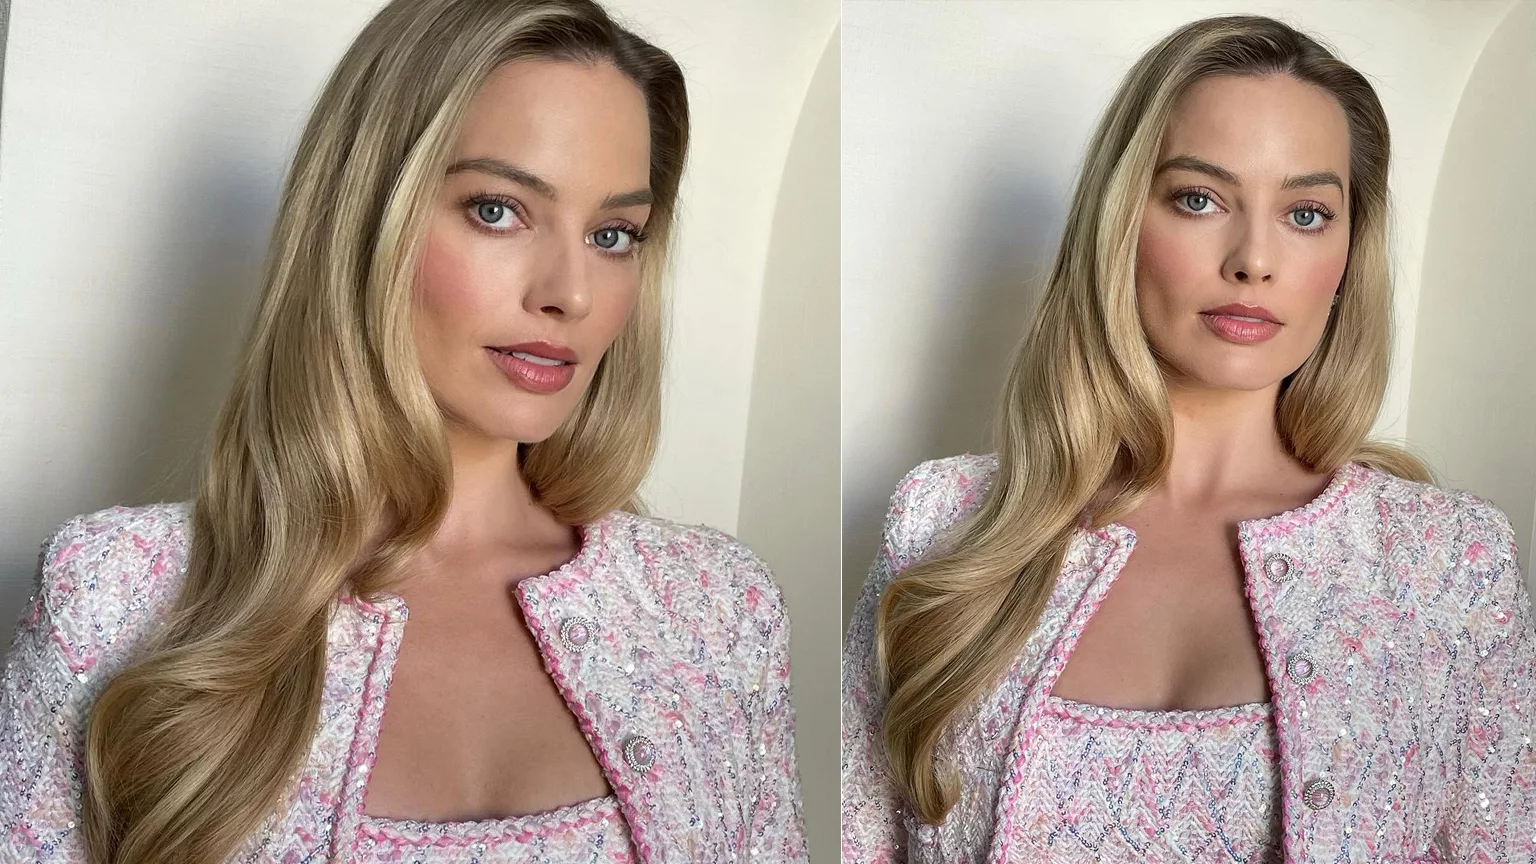 Margot Robbie 96th Oscars Nominees Luncheon in Chanel